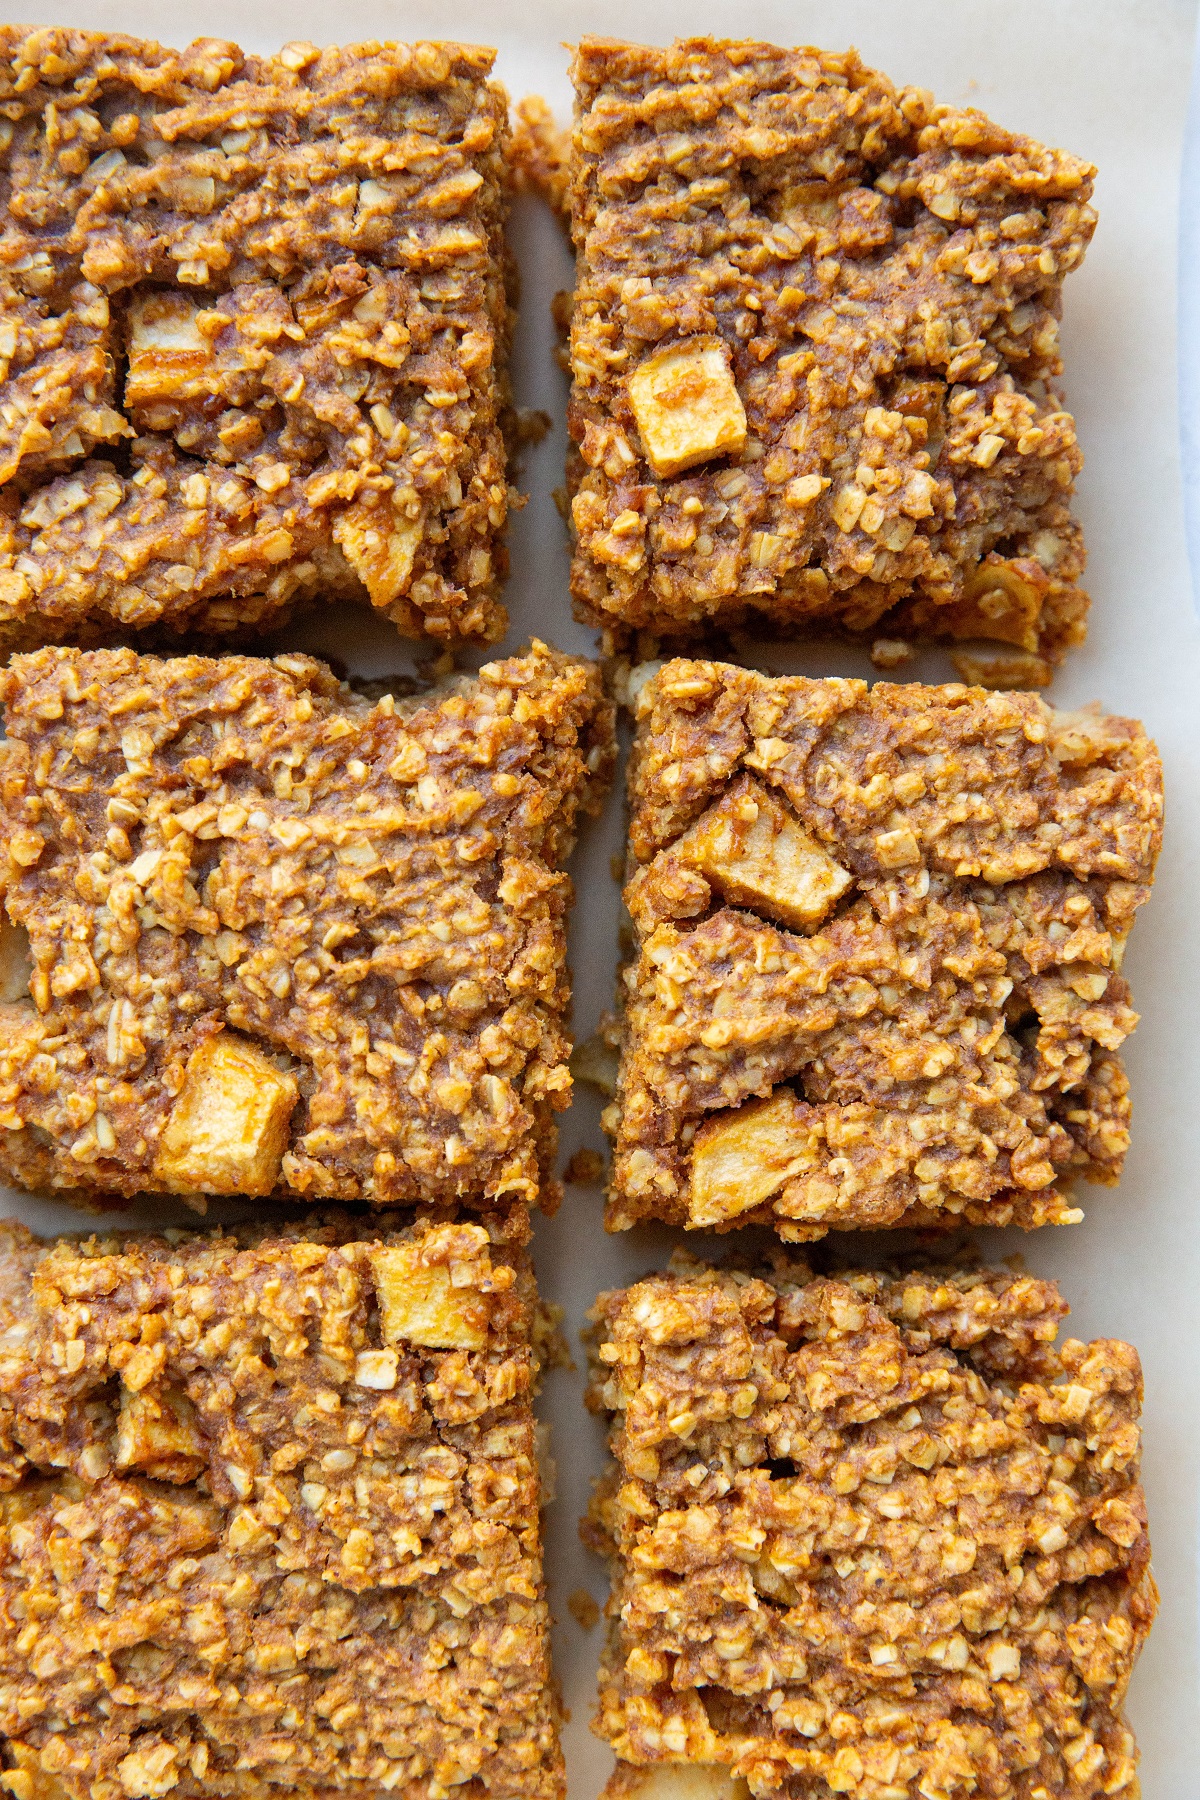 Apple pumpkin oatmeal bars on a sheet of parchment paper, cut into individual squares.